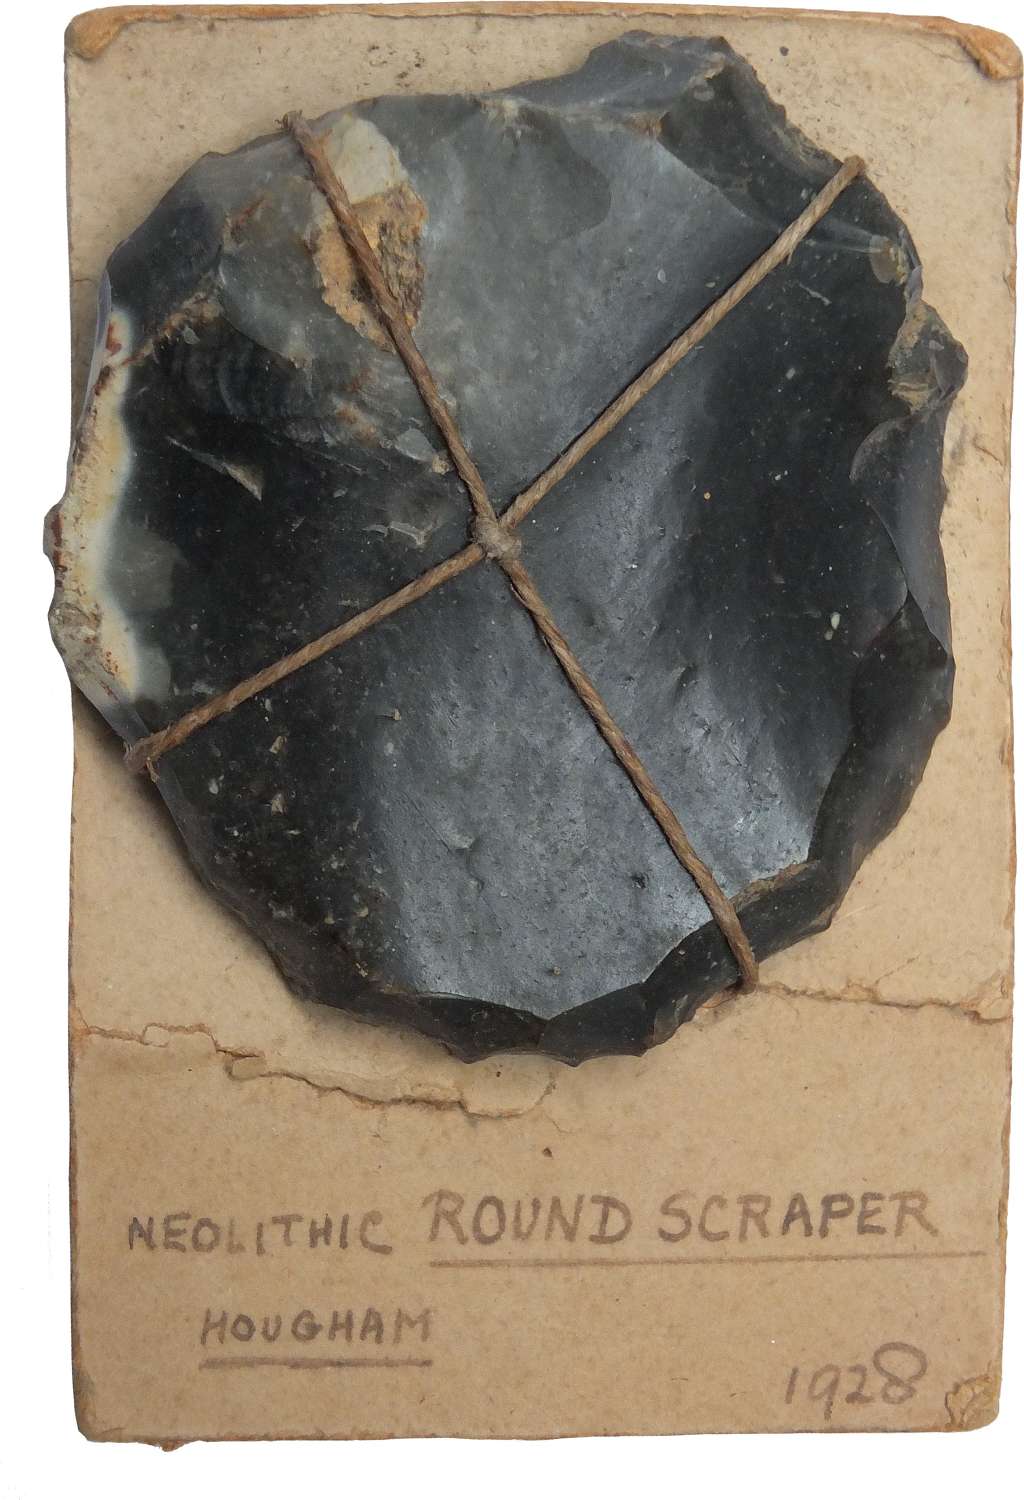 A Neolithic flint scraper found at Hougham, near Dover, Kent, in 1928